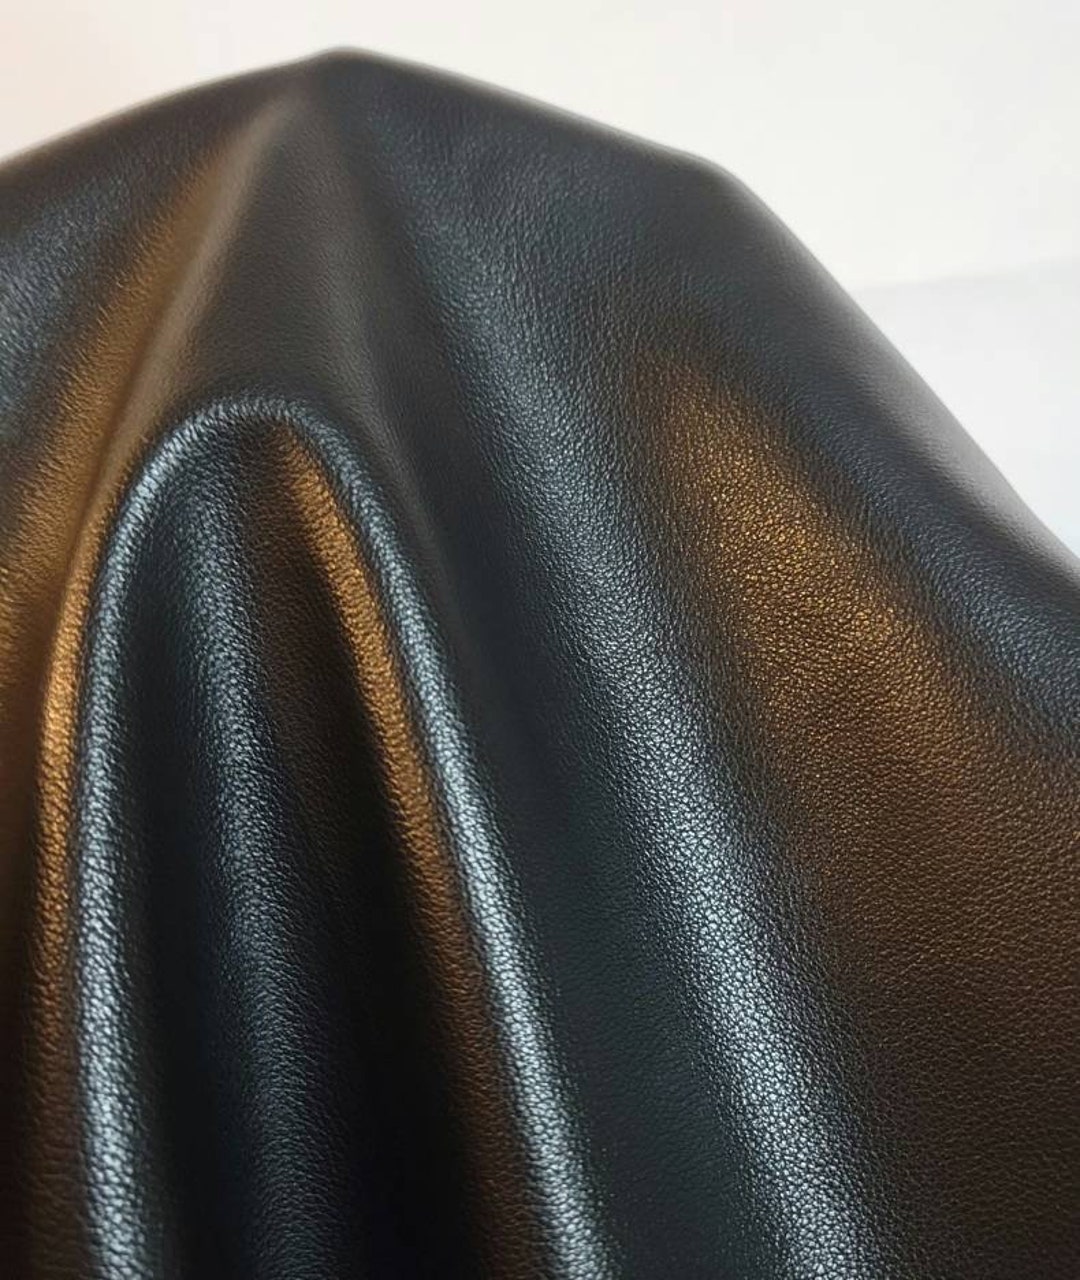 Black Distressed Genuine Upholstery Leather, Fabric Bistro, Columbia